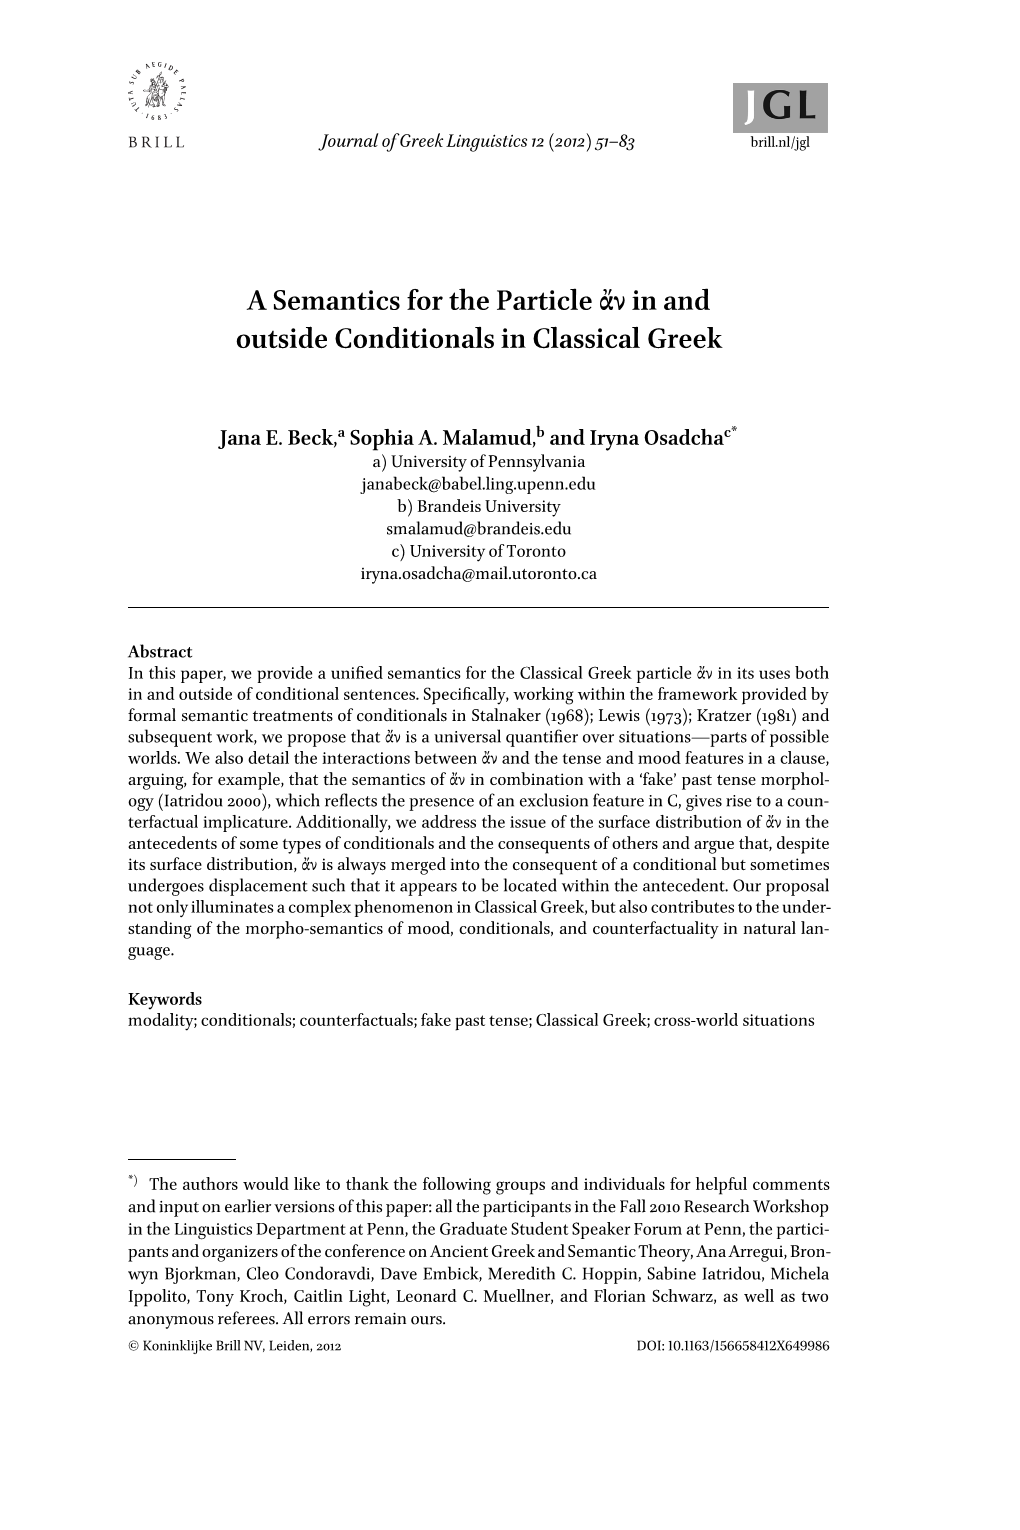 A Semantics for the Particle Ν in and Outside Conditionals in Classical